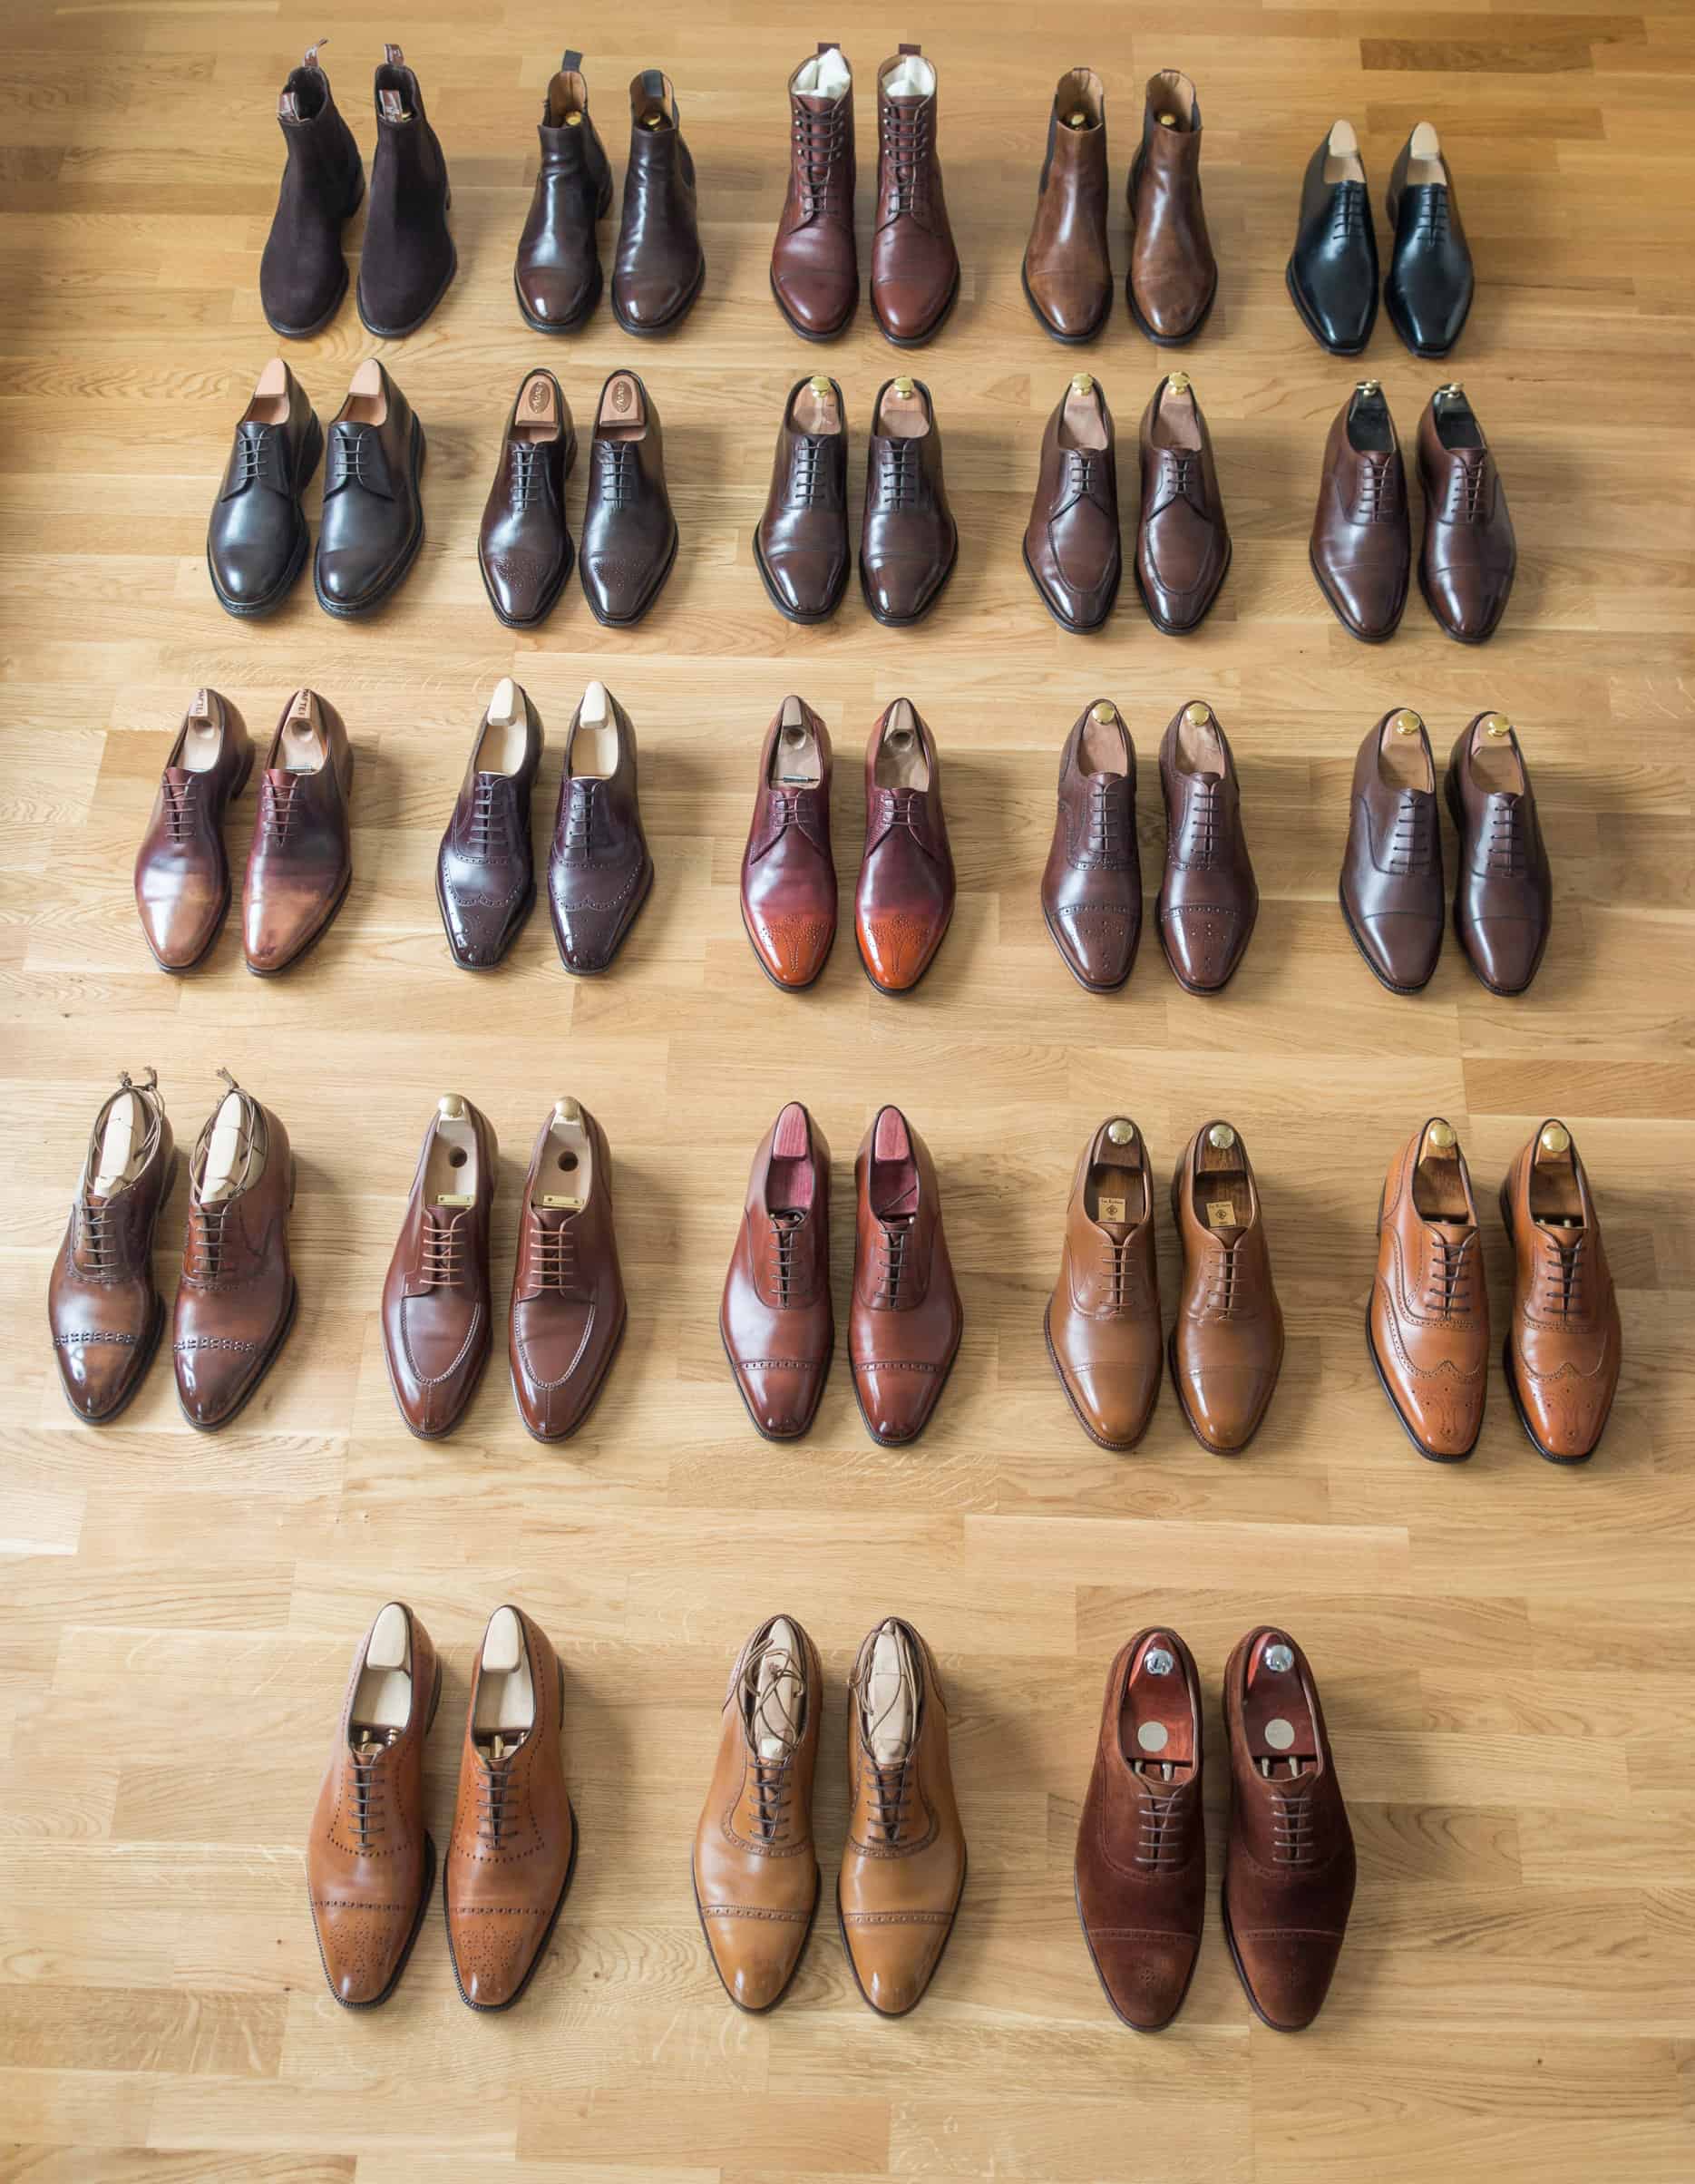 Guide – My shoe collection 4 